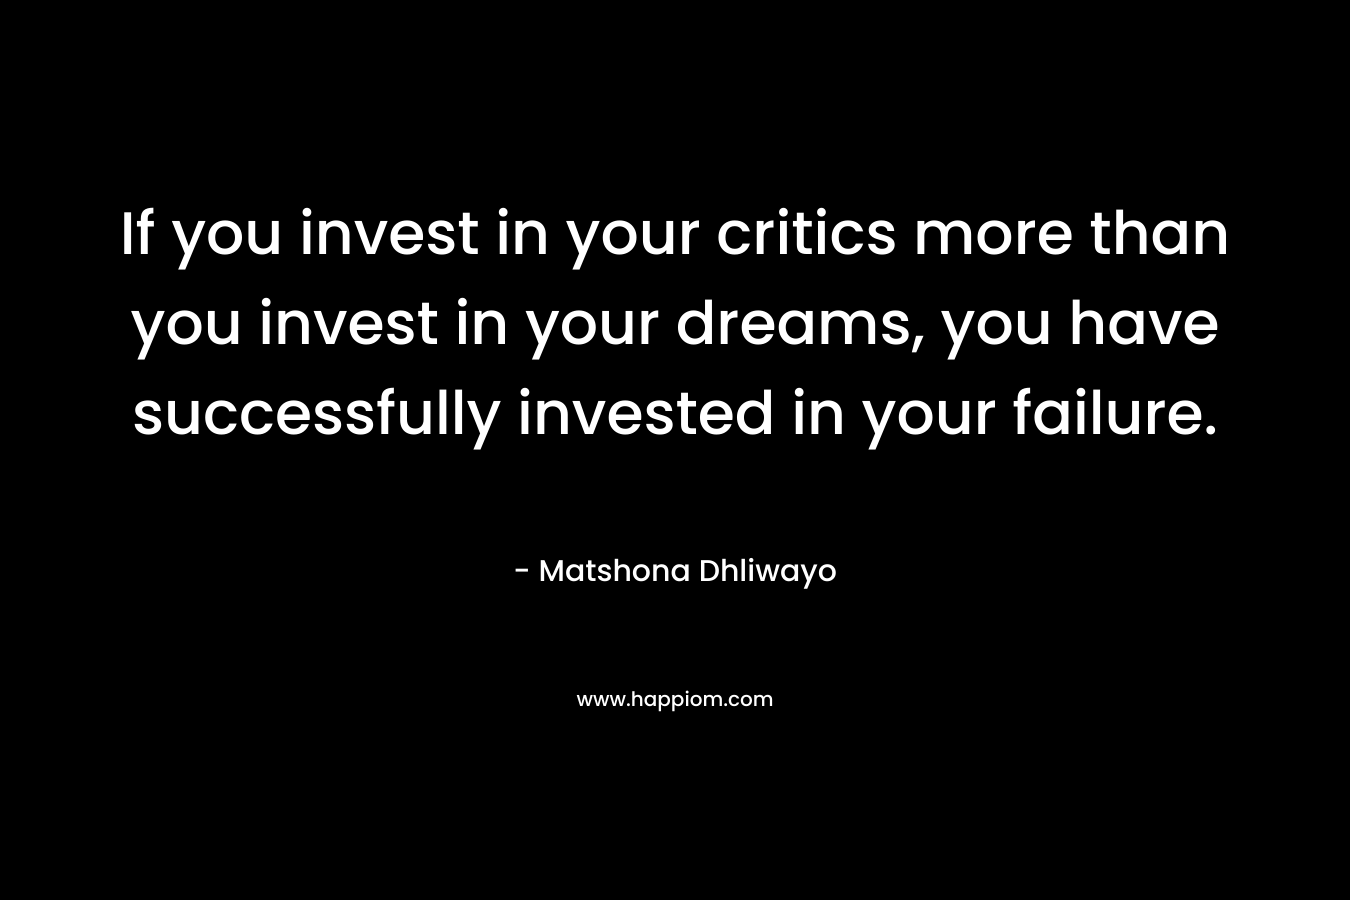 If you invest in your critics more than you invest in your dreams, you have successfully invested in your failure.